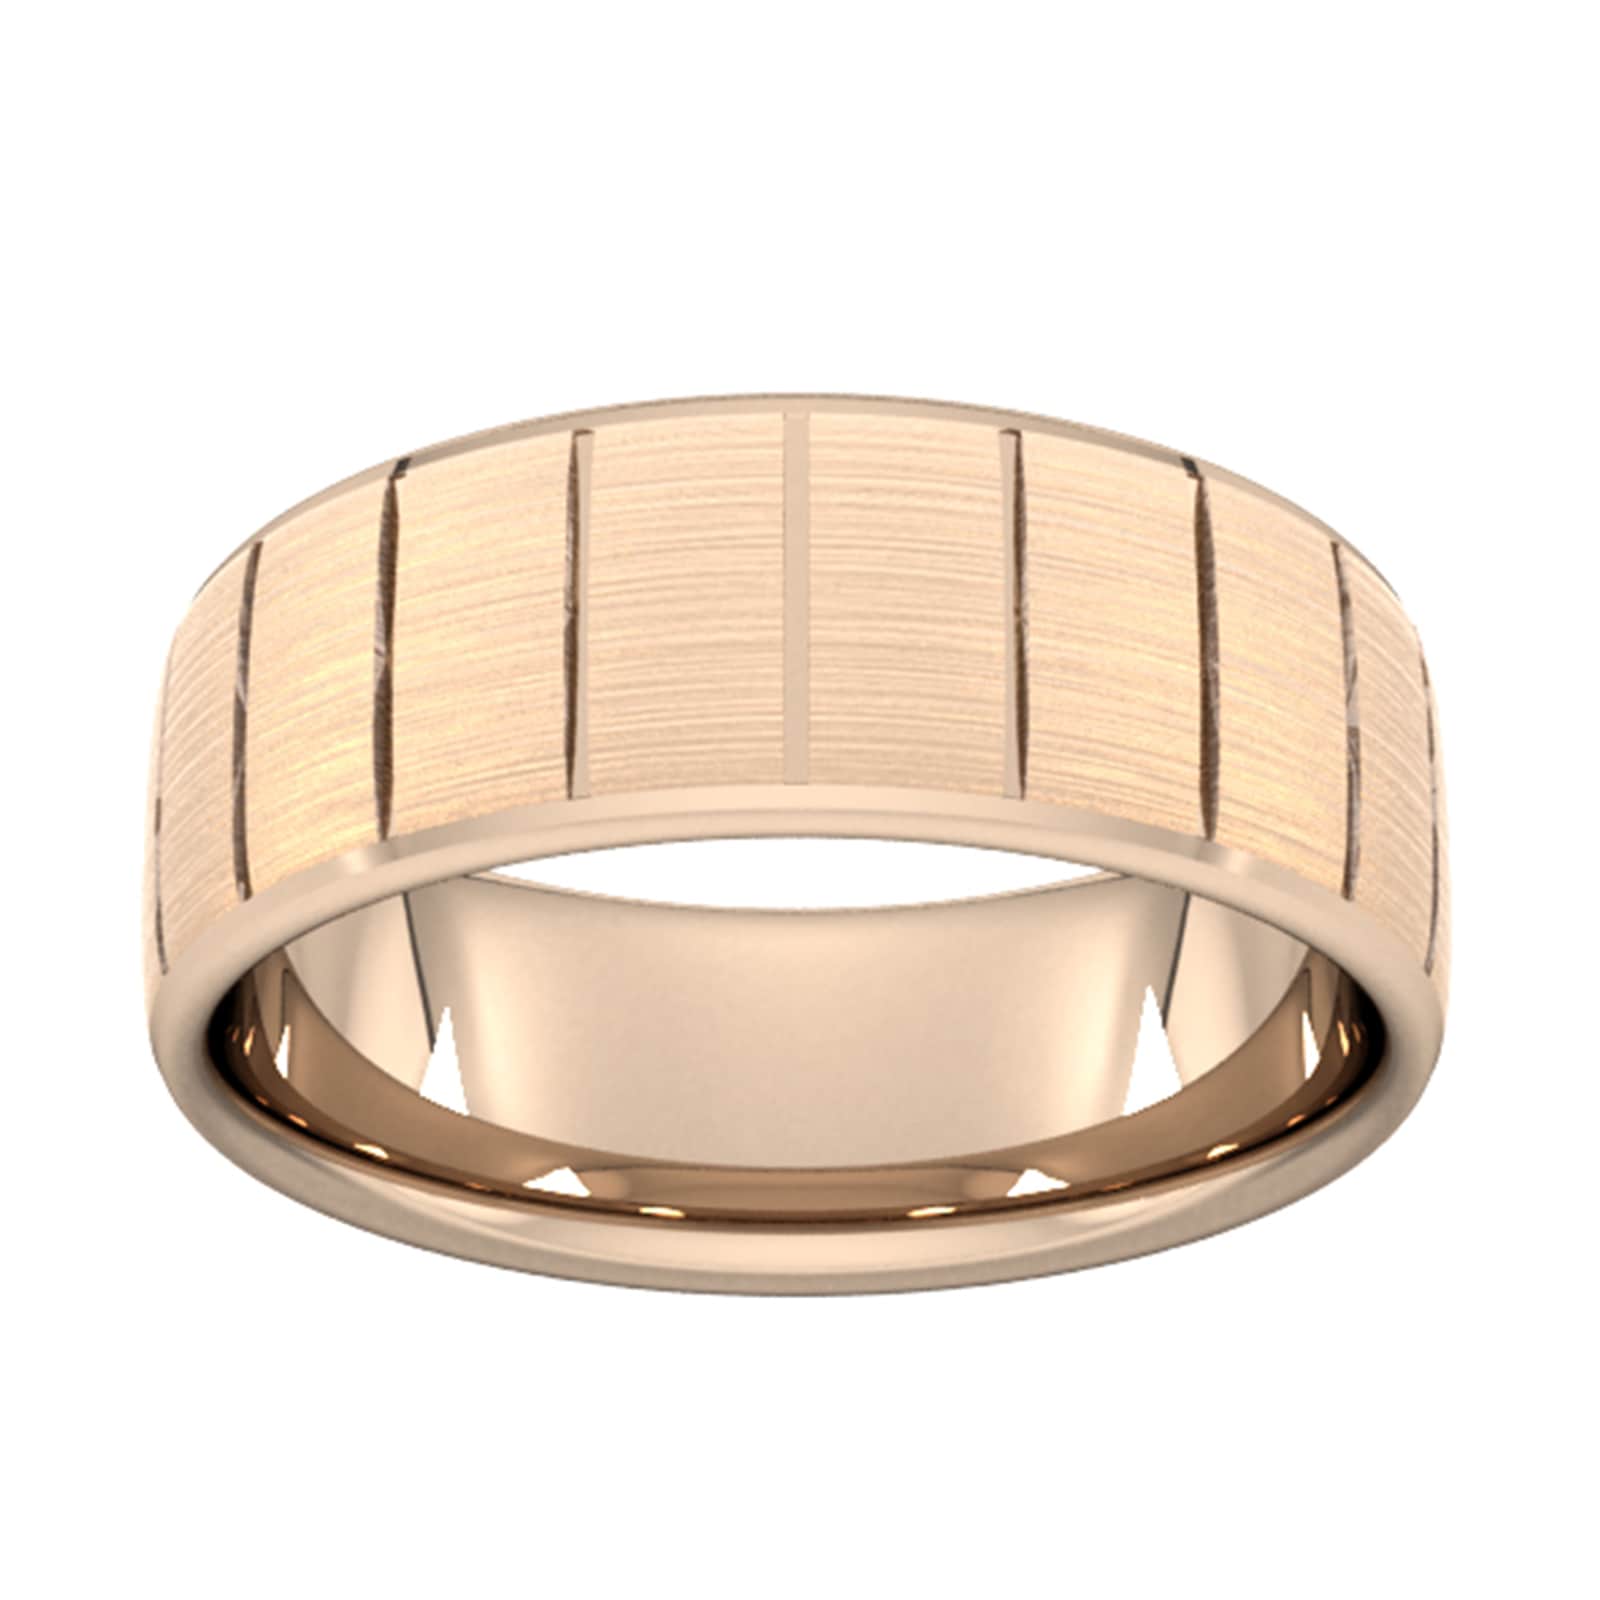 8mm Flat Court Heavy Vertical Lines Wedding Ring In 18 Carat Rose Gold - Ring Size W